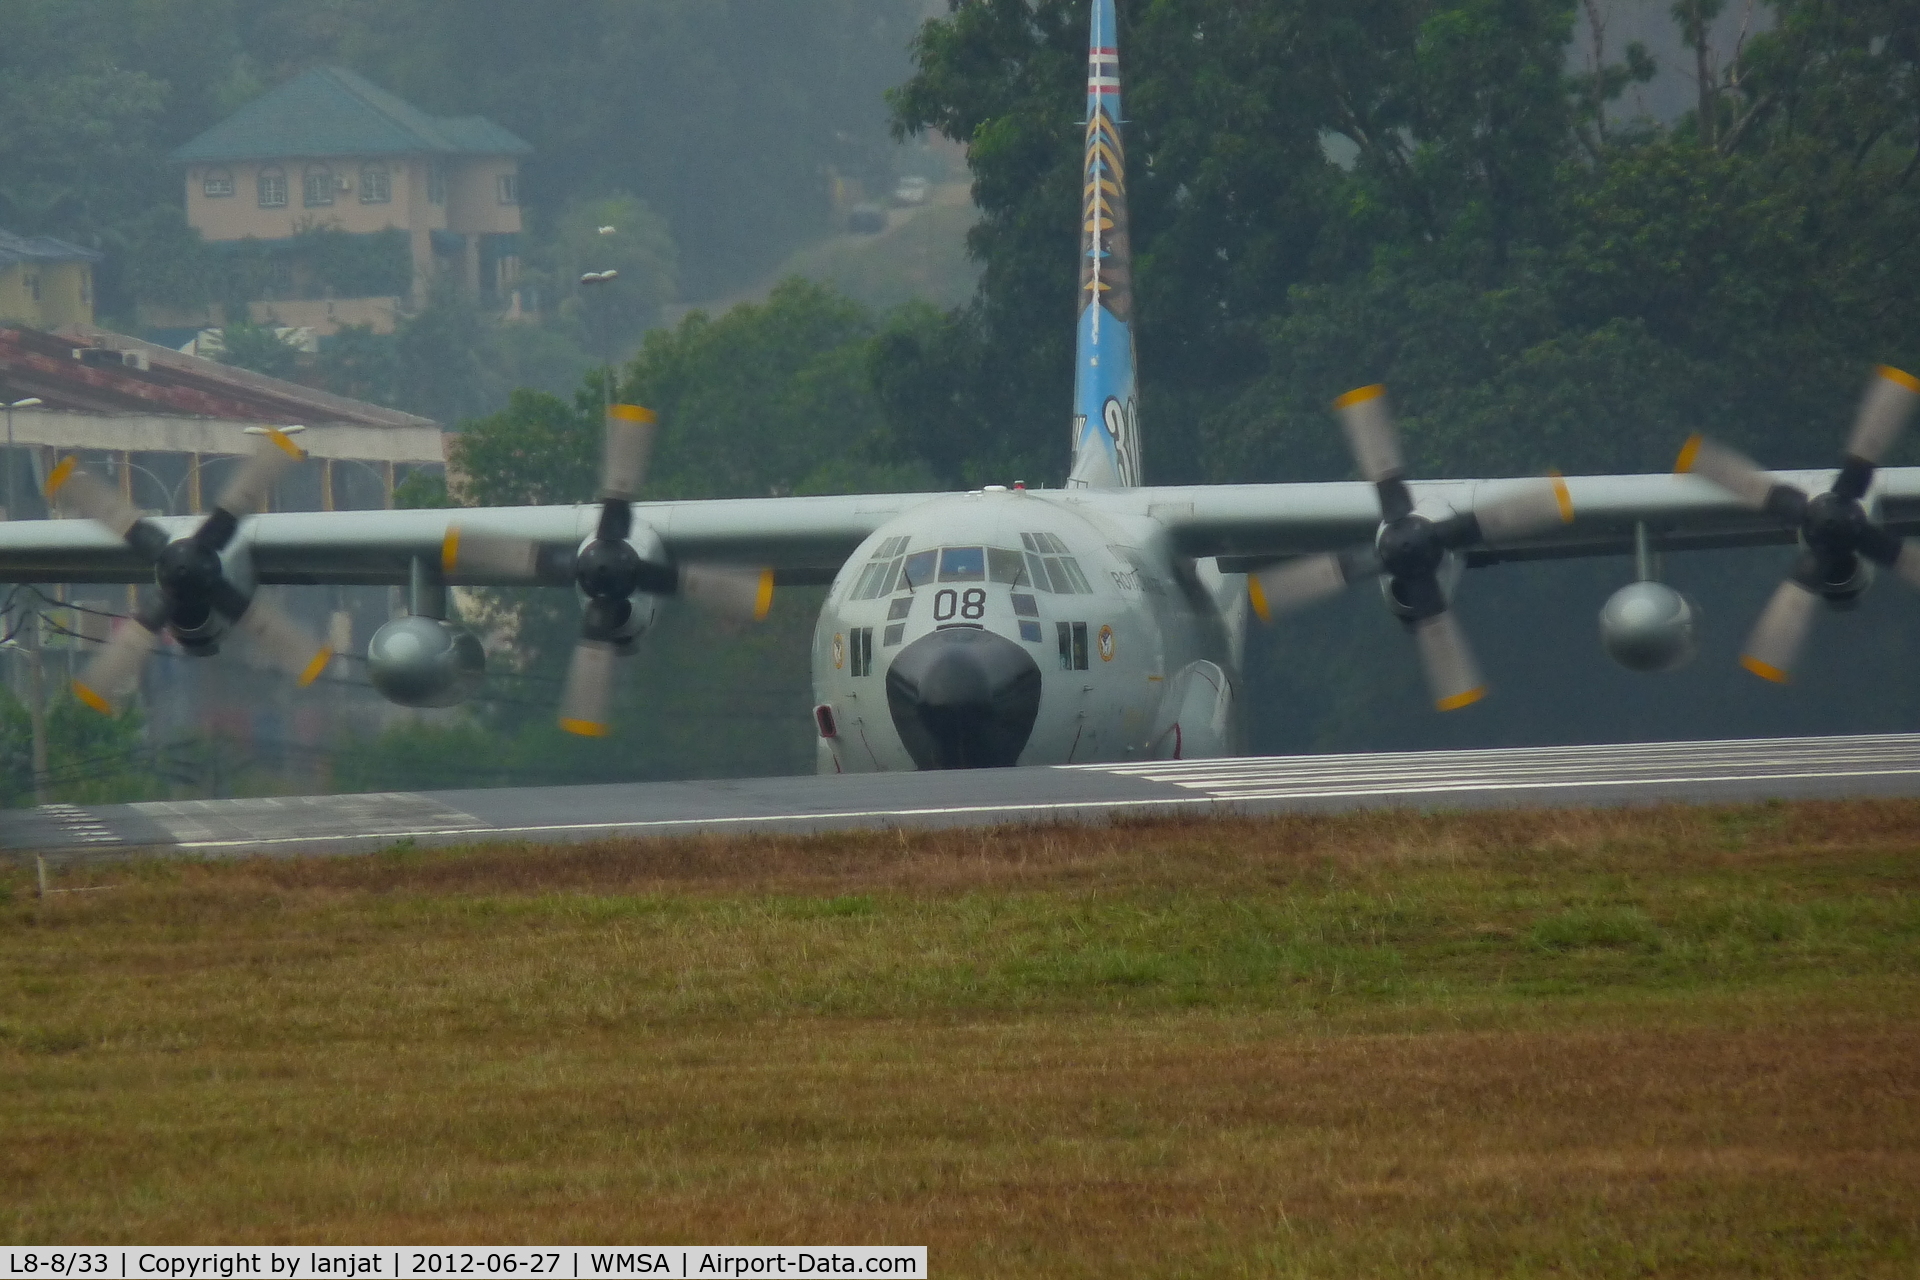 L8-8/33, 1990 Lockheed C-130H Hercules C/N 382-5209, Taxi to Hold at Exit 15 Kilo